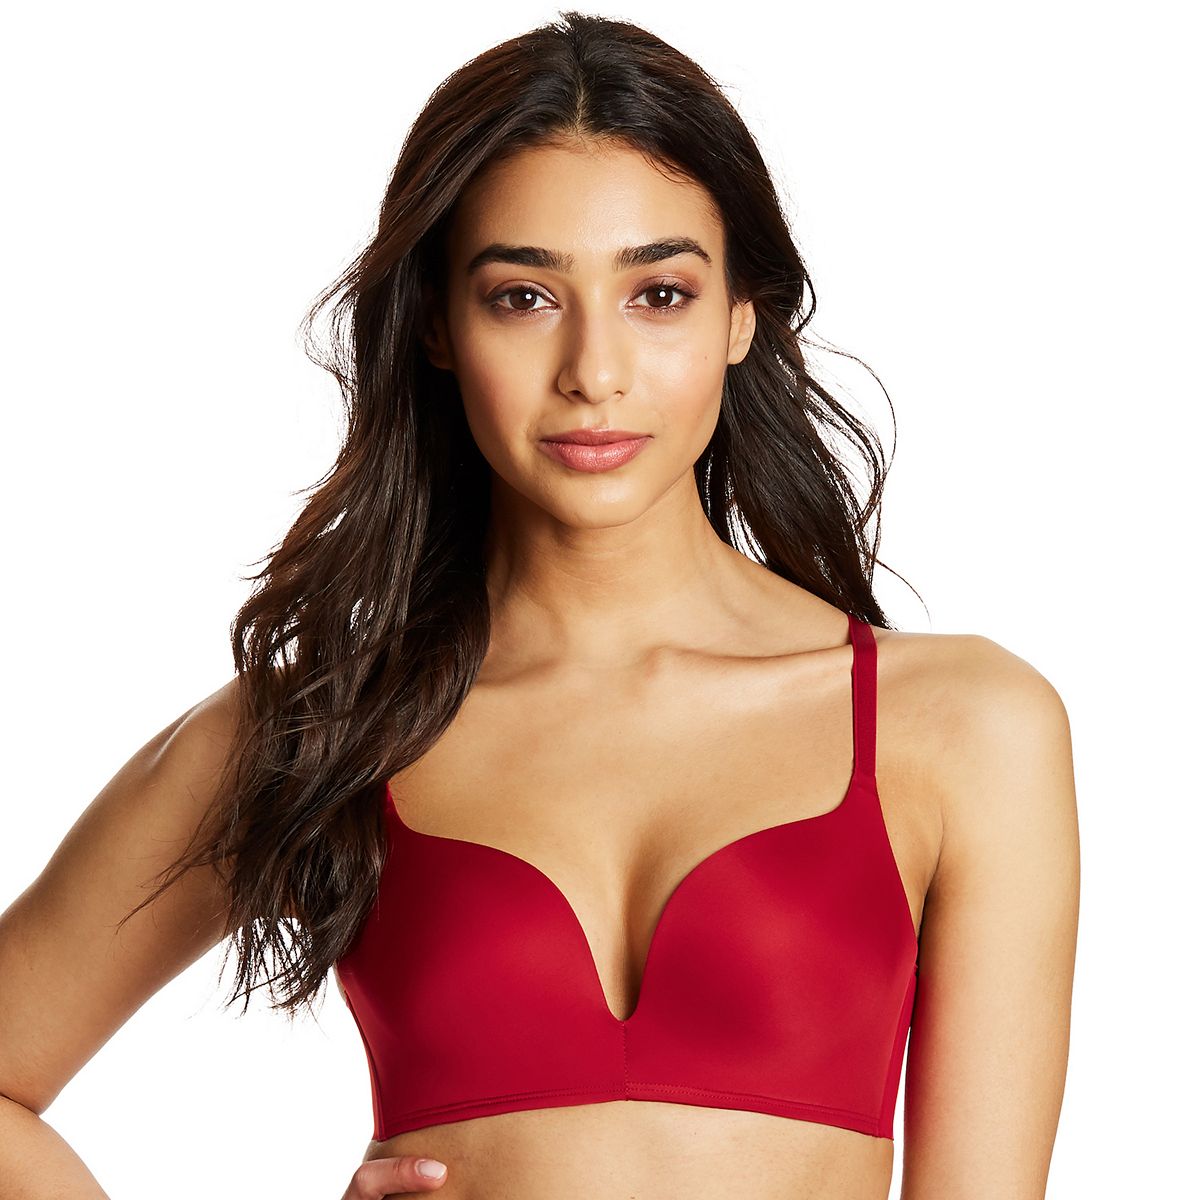 Maidenform Womens Love the Lift Plunge Push-up & in Bra Style